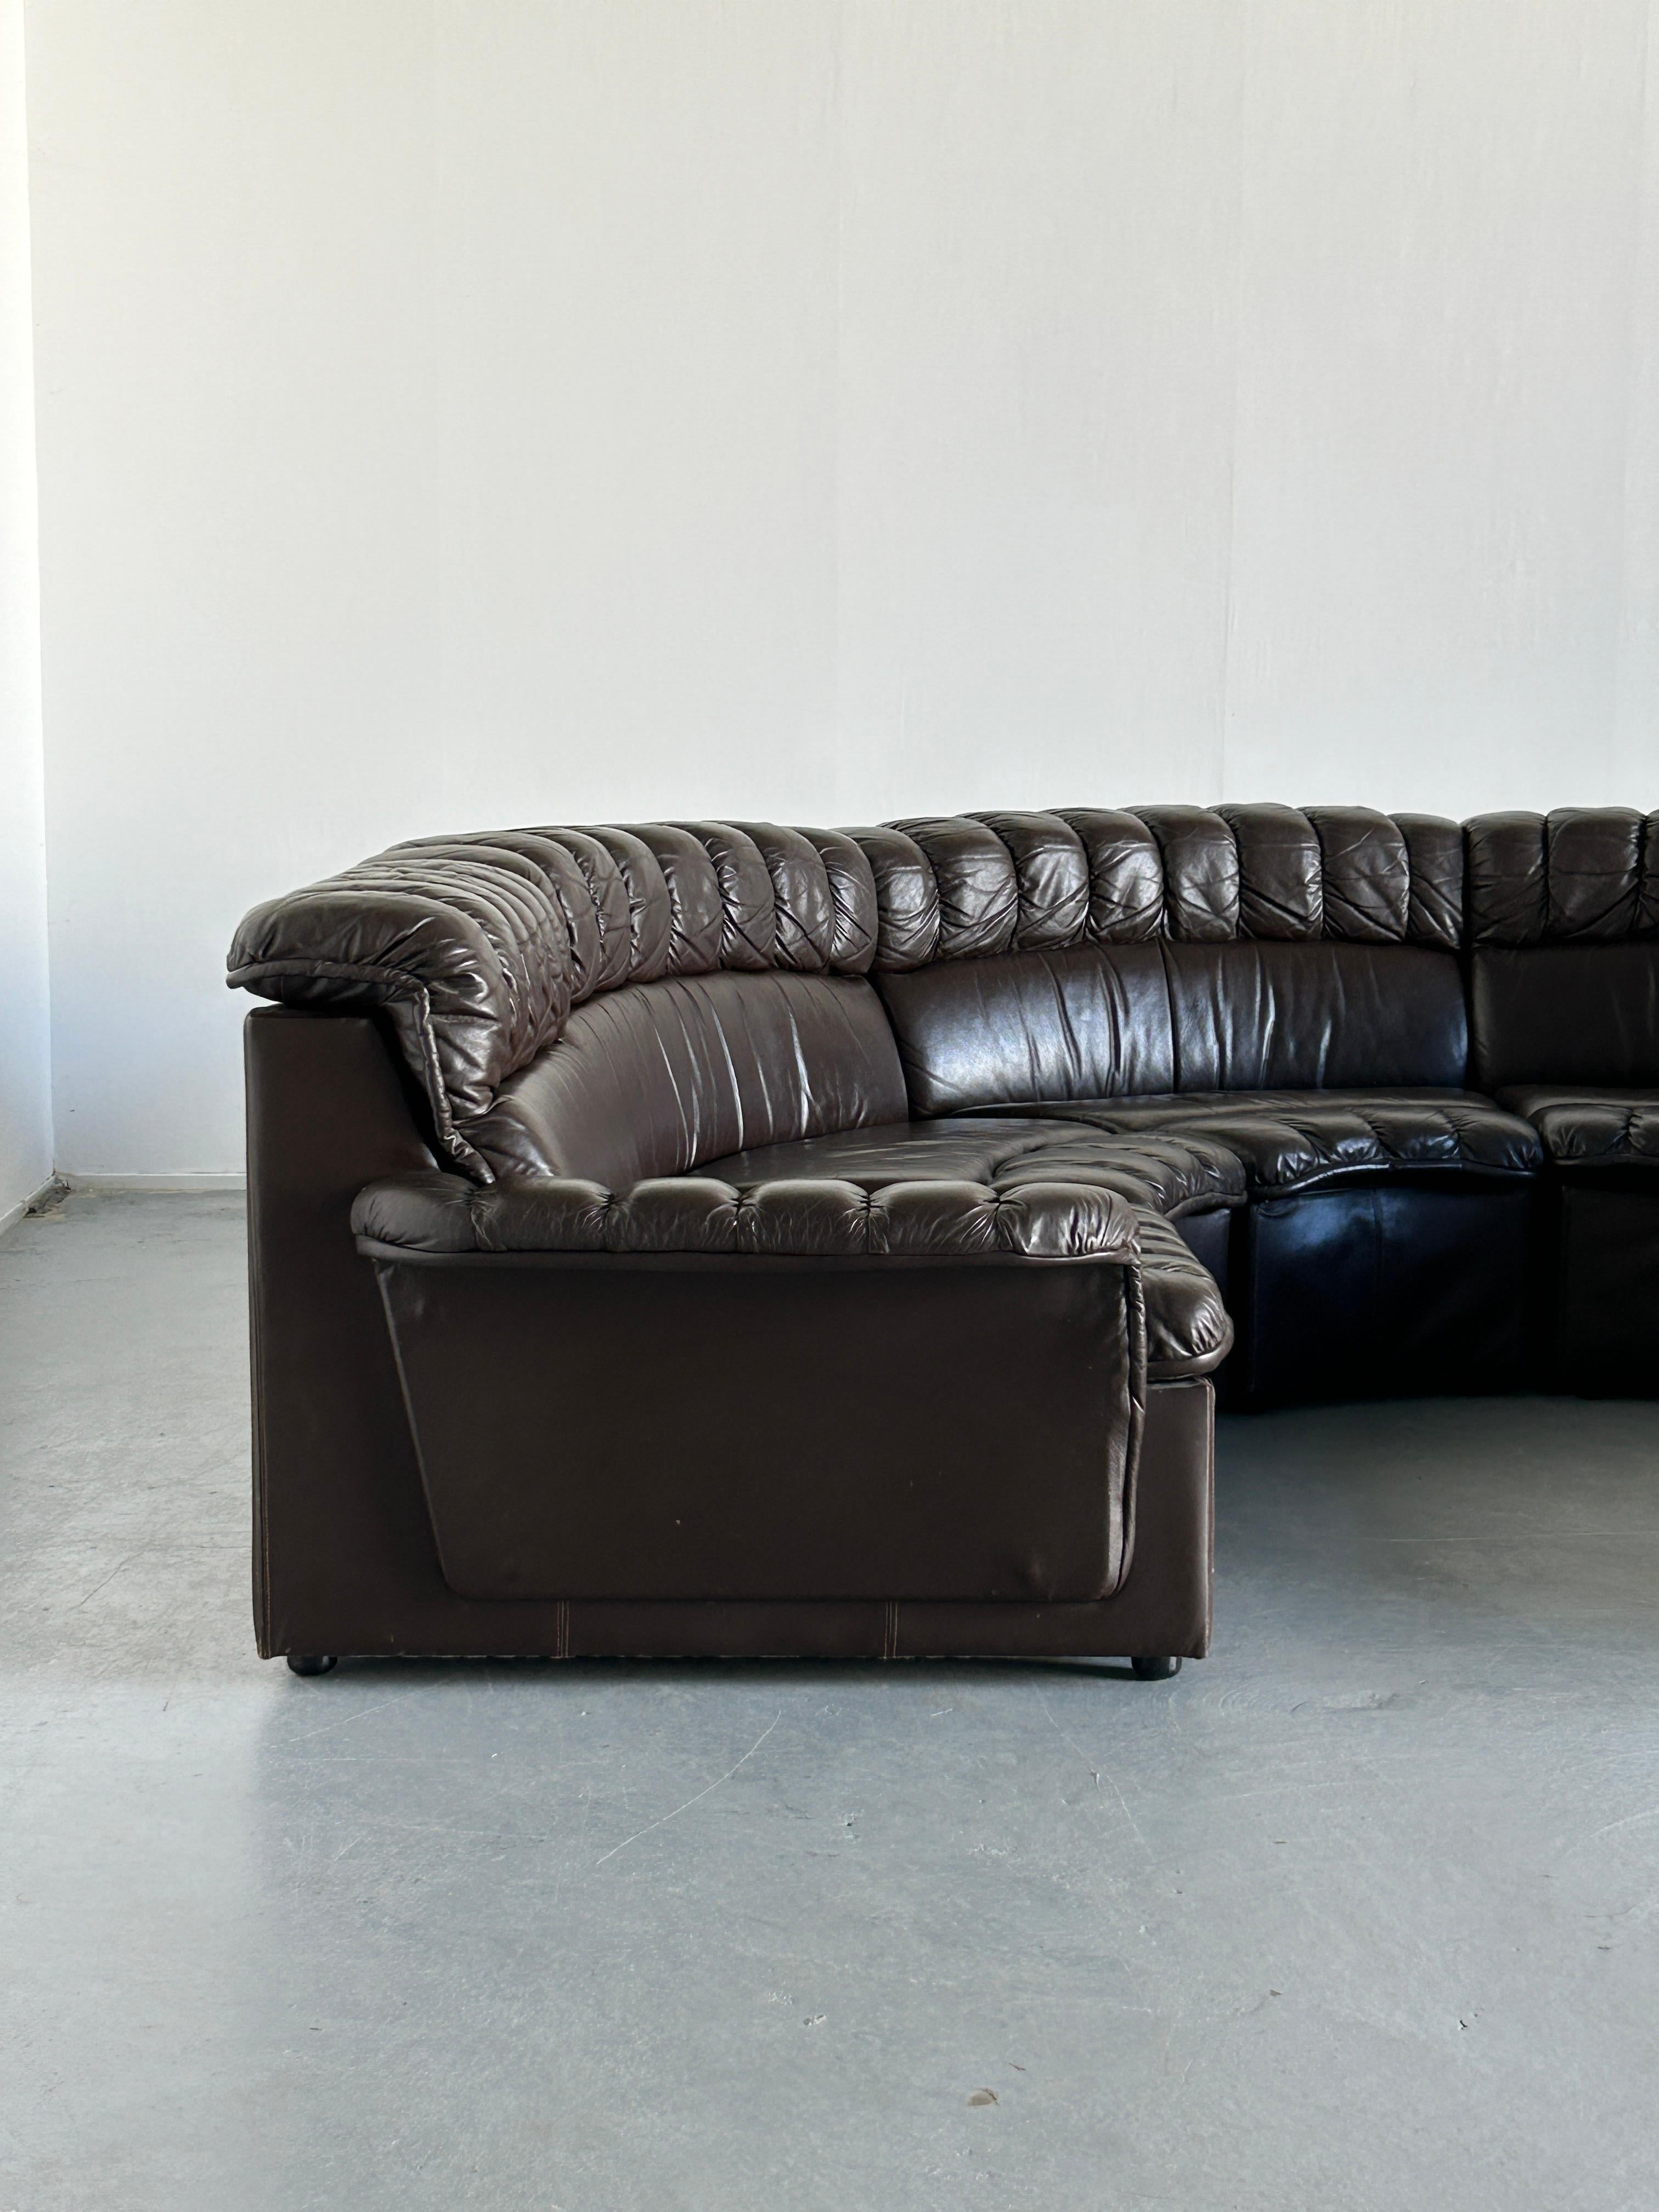 Mid-Century-Modern Leather Snake Sofa in style of De Sede DS-600 Non-Stop, 1970s For Sale 3